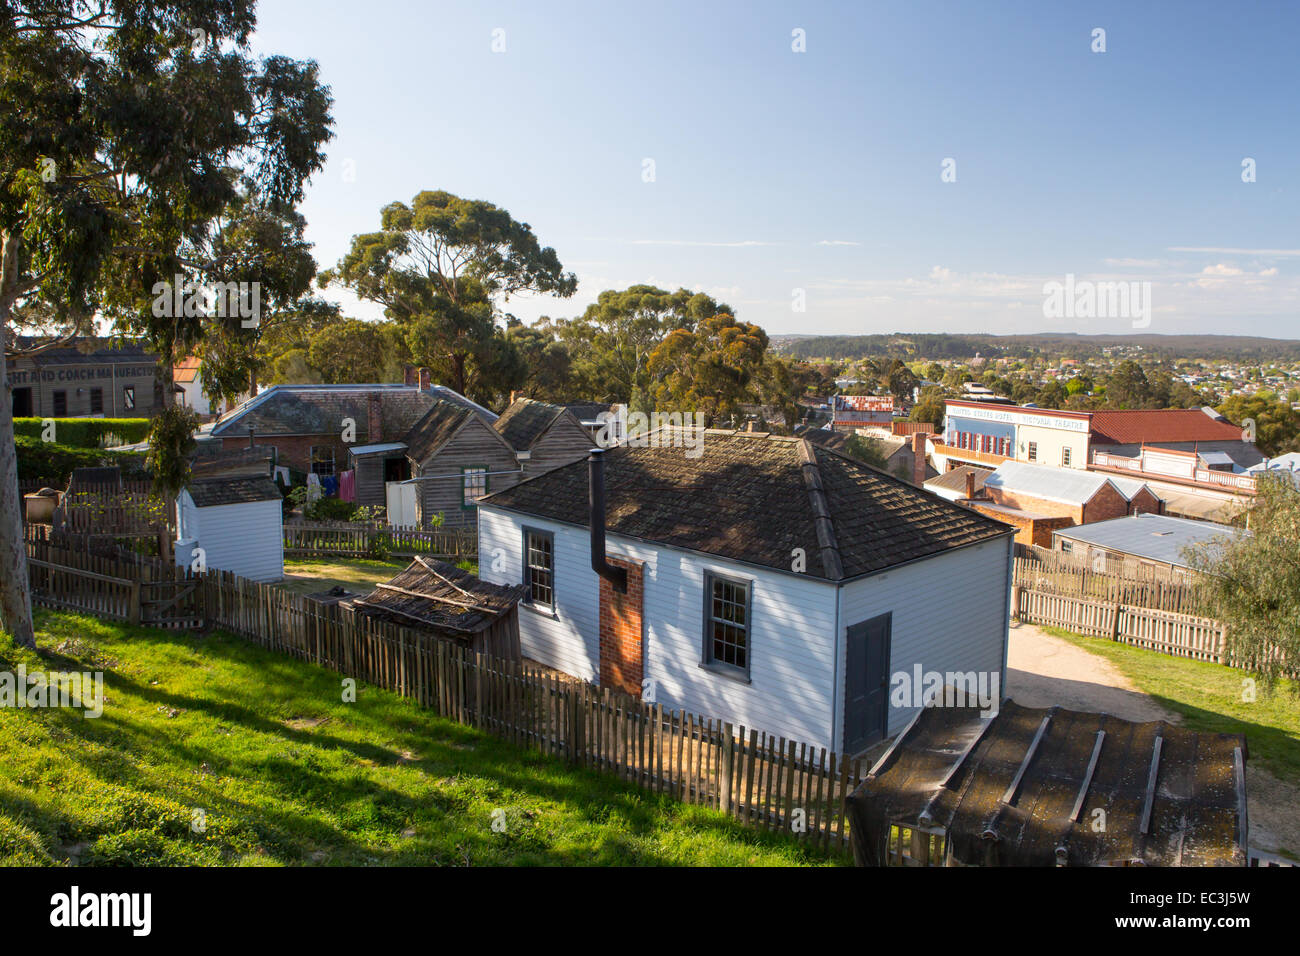 SOVEREIGN HILL, AUSTRALIA - OCTOBER 5: Sovereign Hill is an open air museum recreating the atmosphere of a gold rush town in Bal Stock Photo